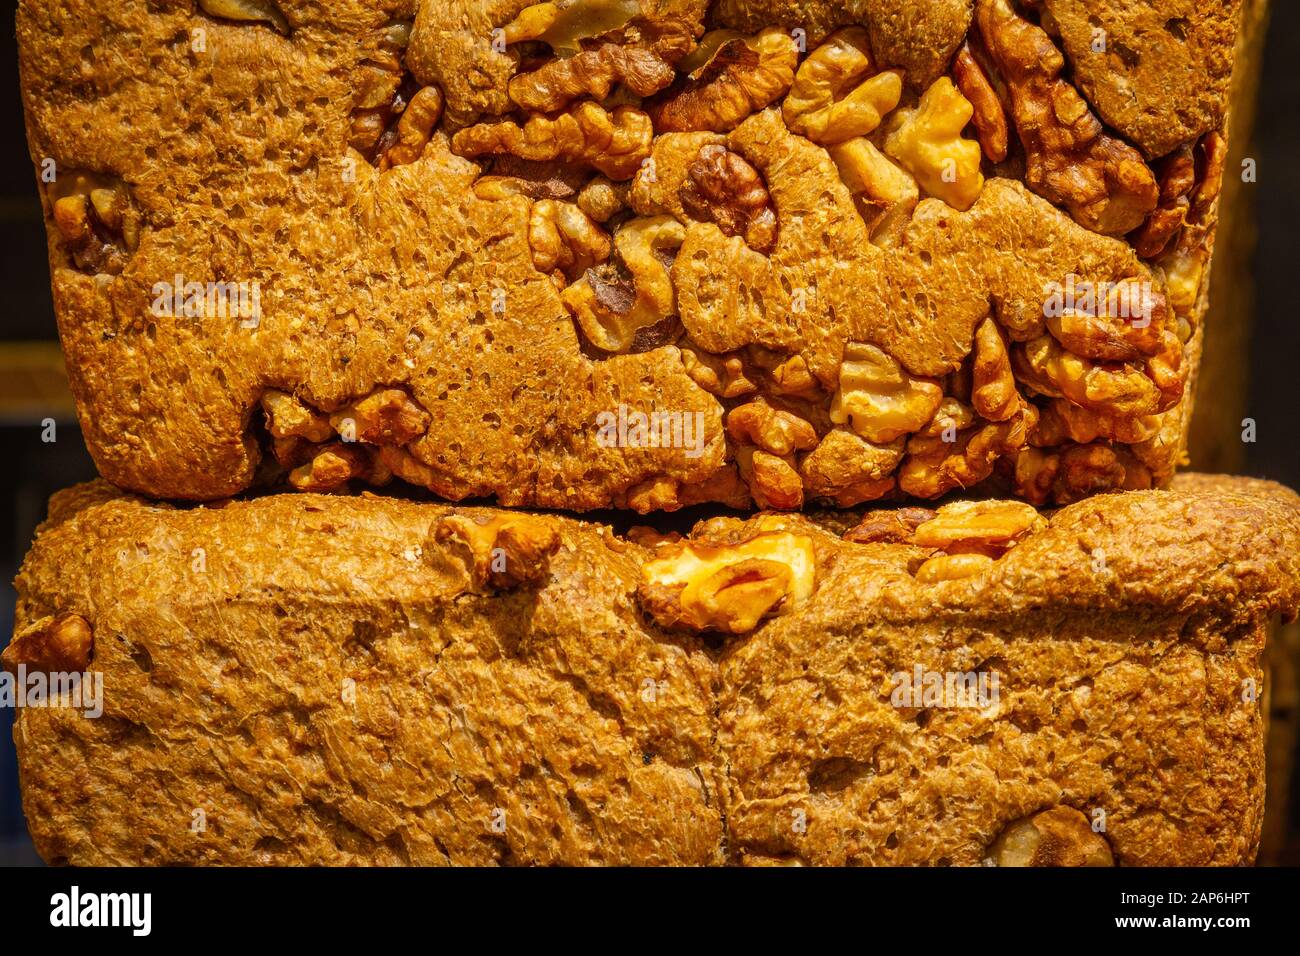 Close-up of Oven Baked Walnut Bread Stock Photo